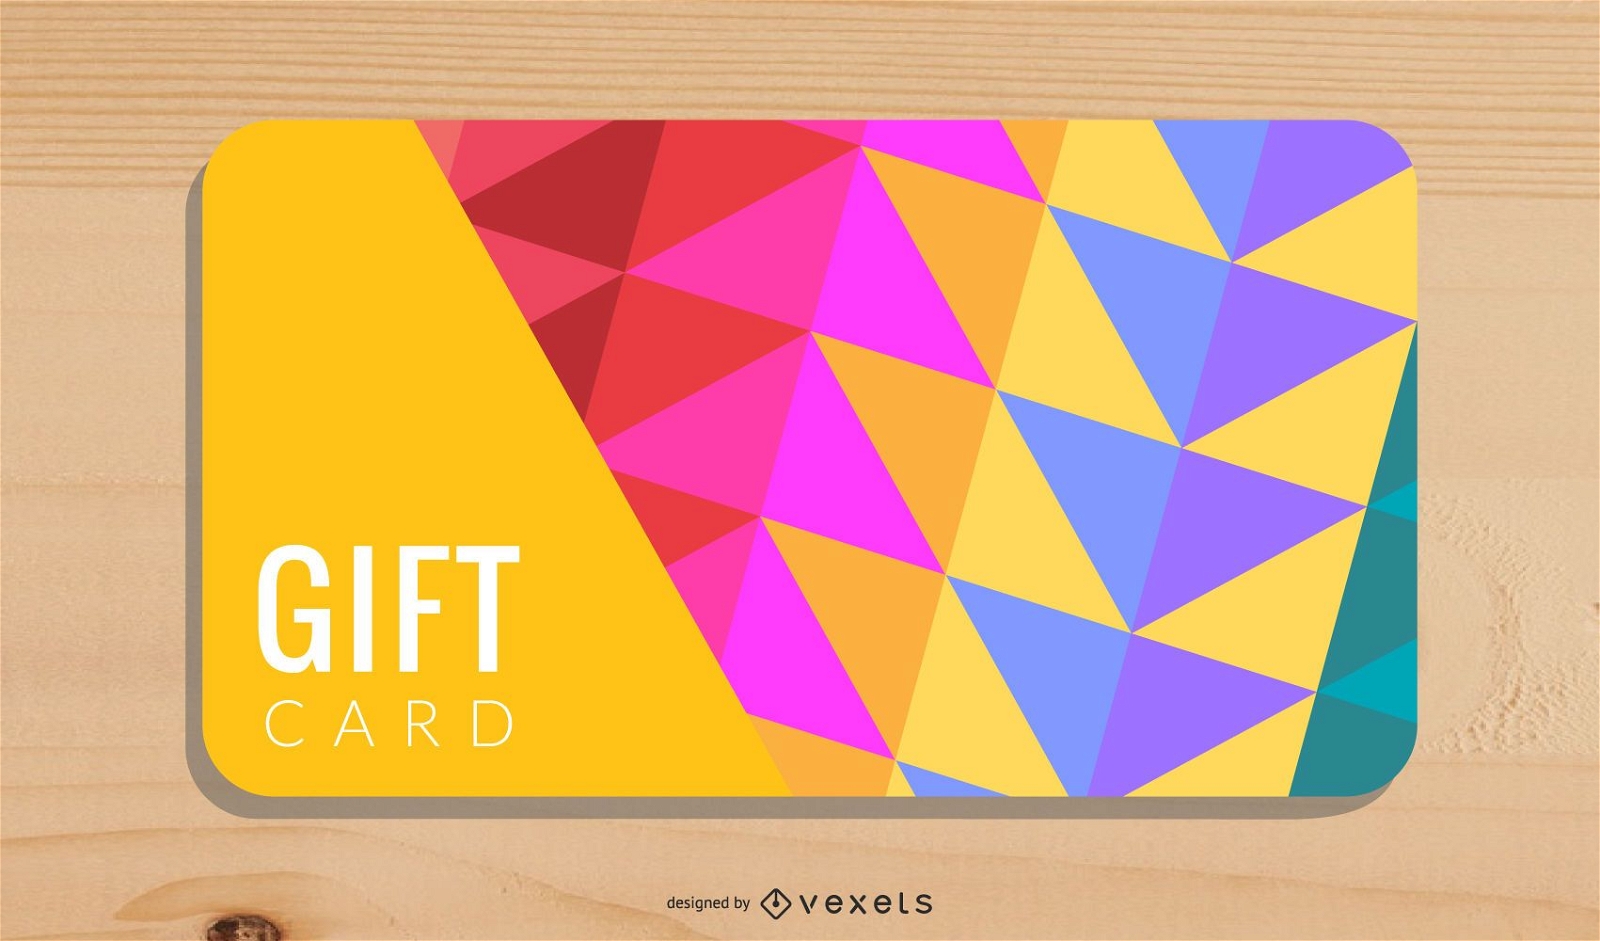 9+ Free Gift Cards - Free PSD, Vector AI, EPS Format Download